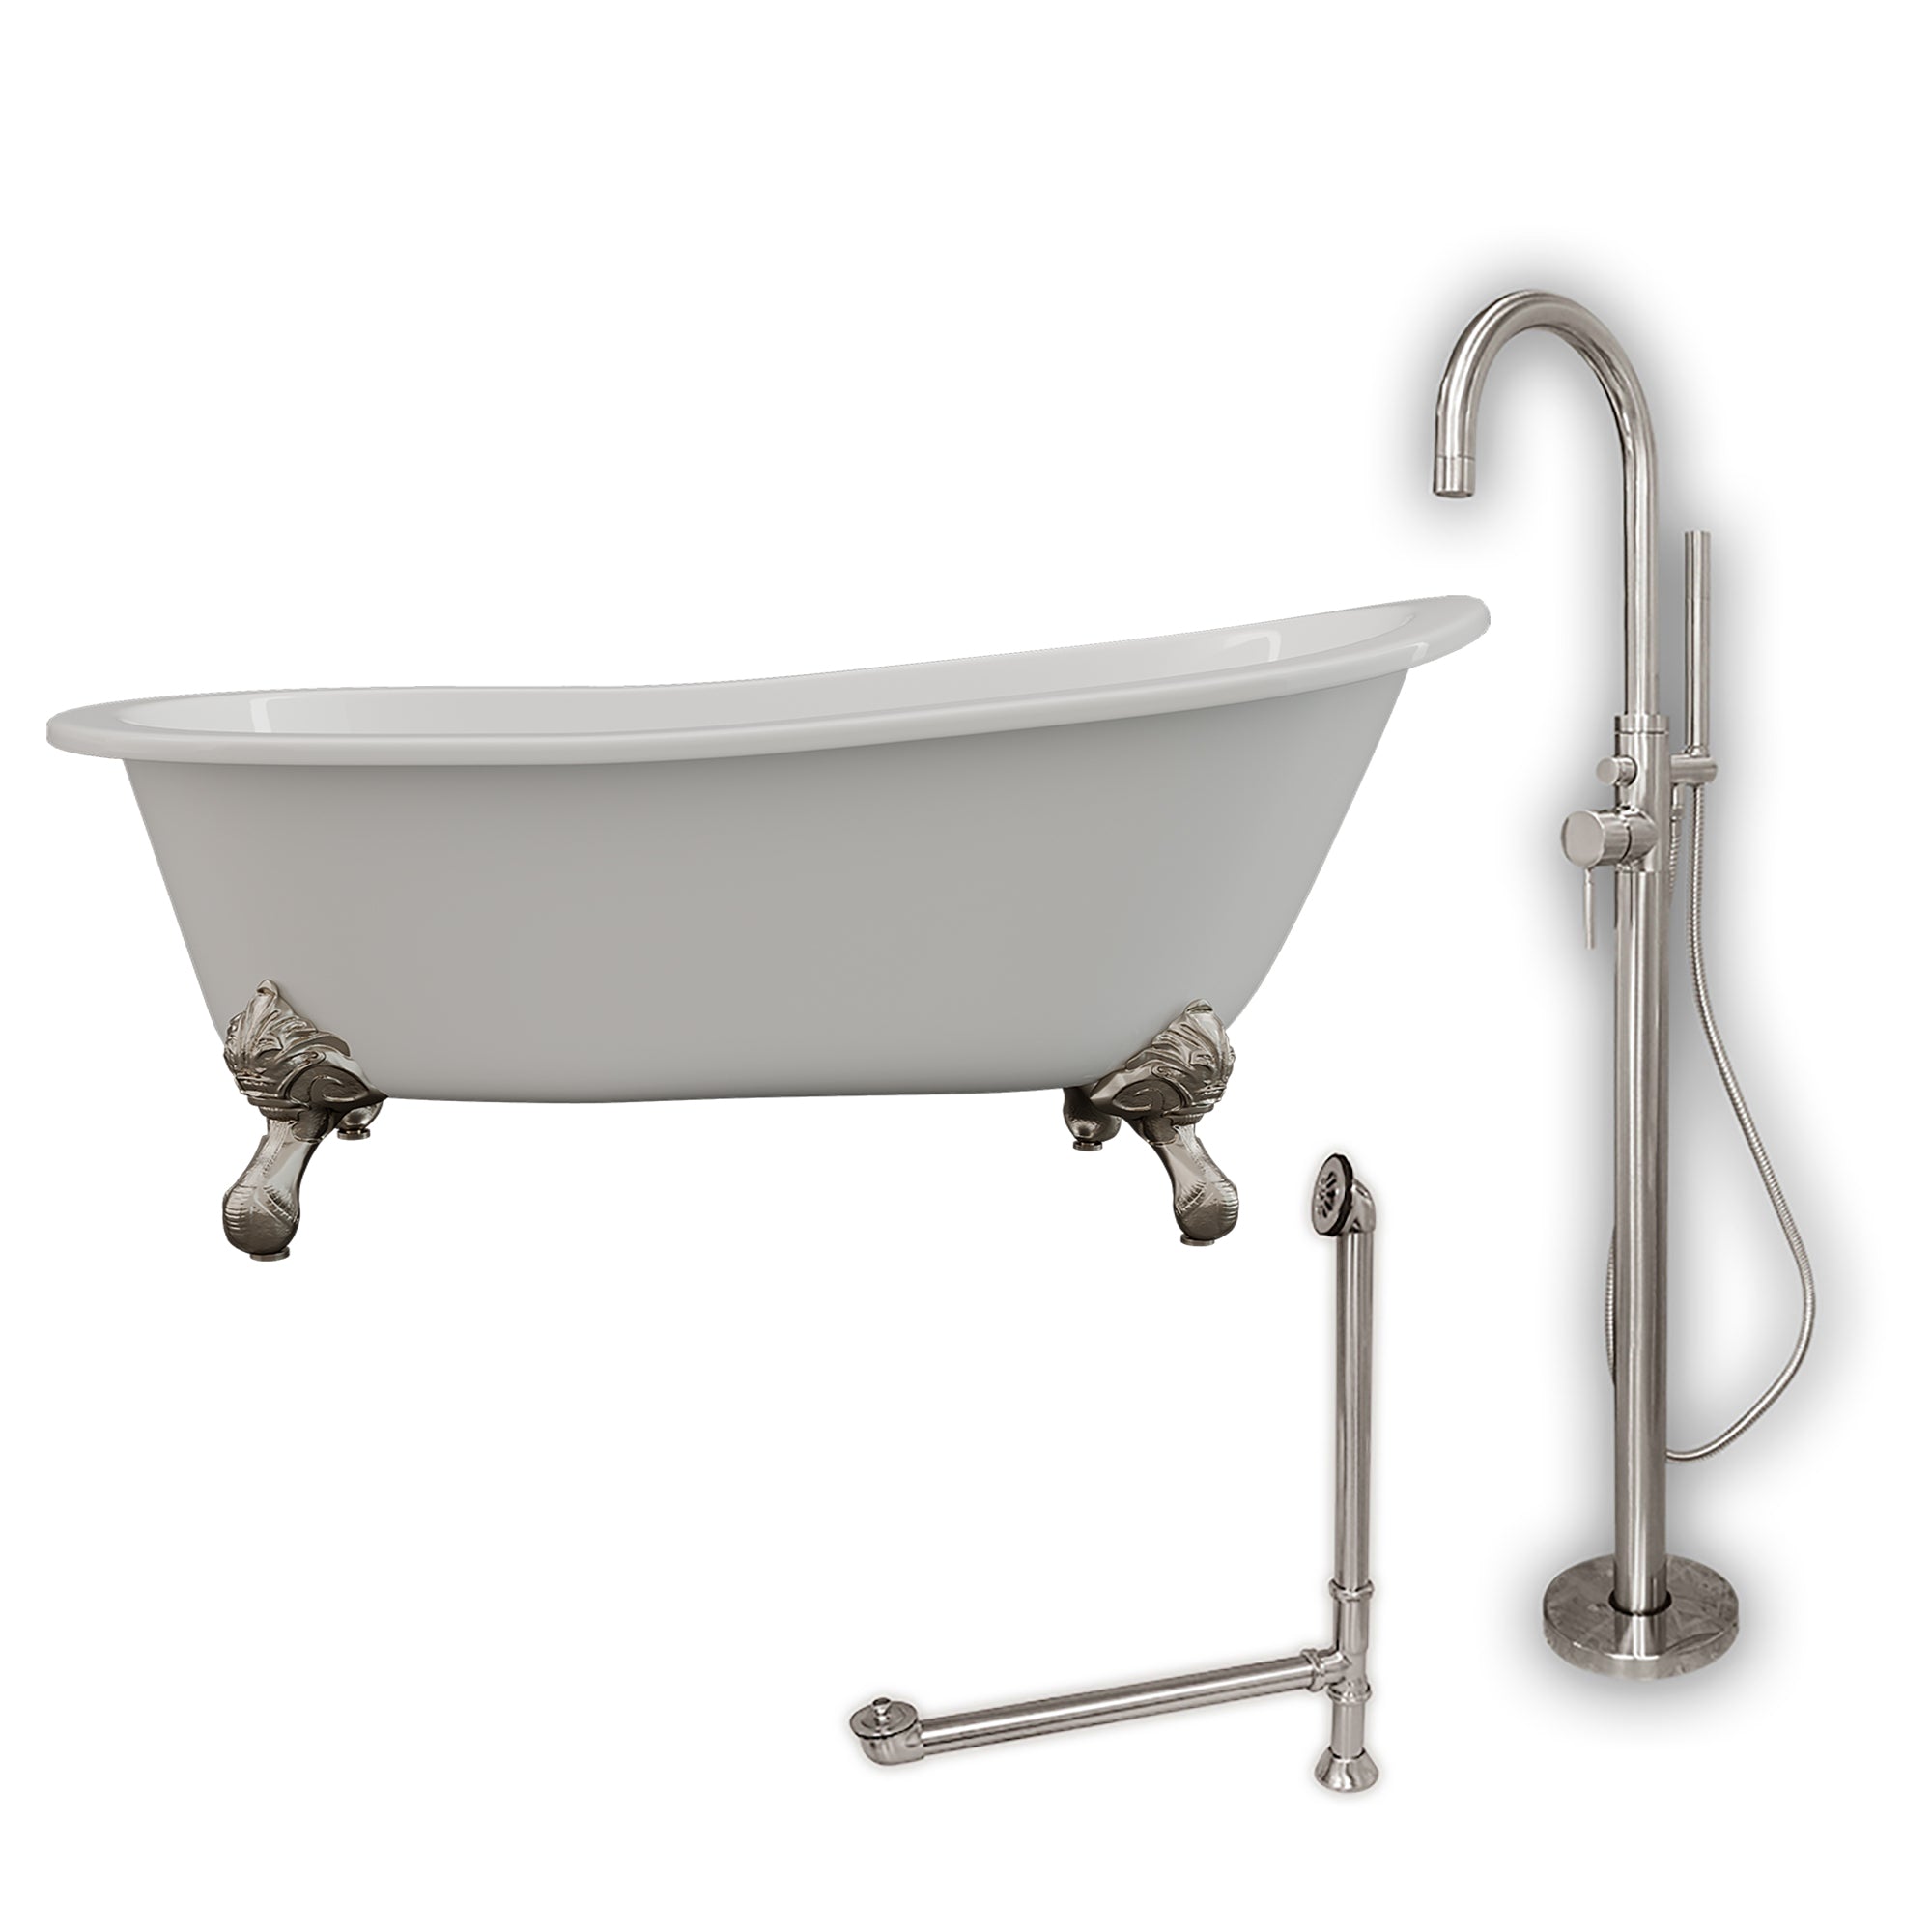 Cambridge Plumbing 67-Inch Slipper Cast Iron Clawfoot Tub (Porcelain enamel interior and white paint exterior) and Freestanding Plumbing Package (Brushed Nickel) ST67-150-PKG-NH - Vital Hydrotherapy